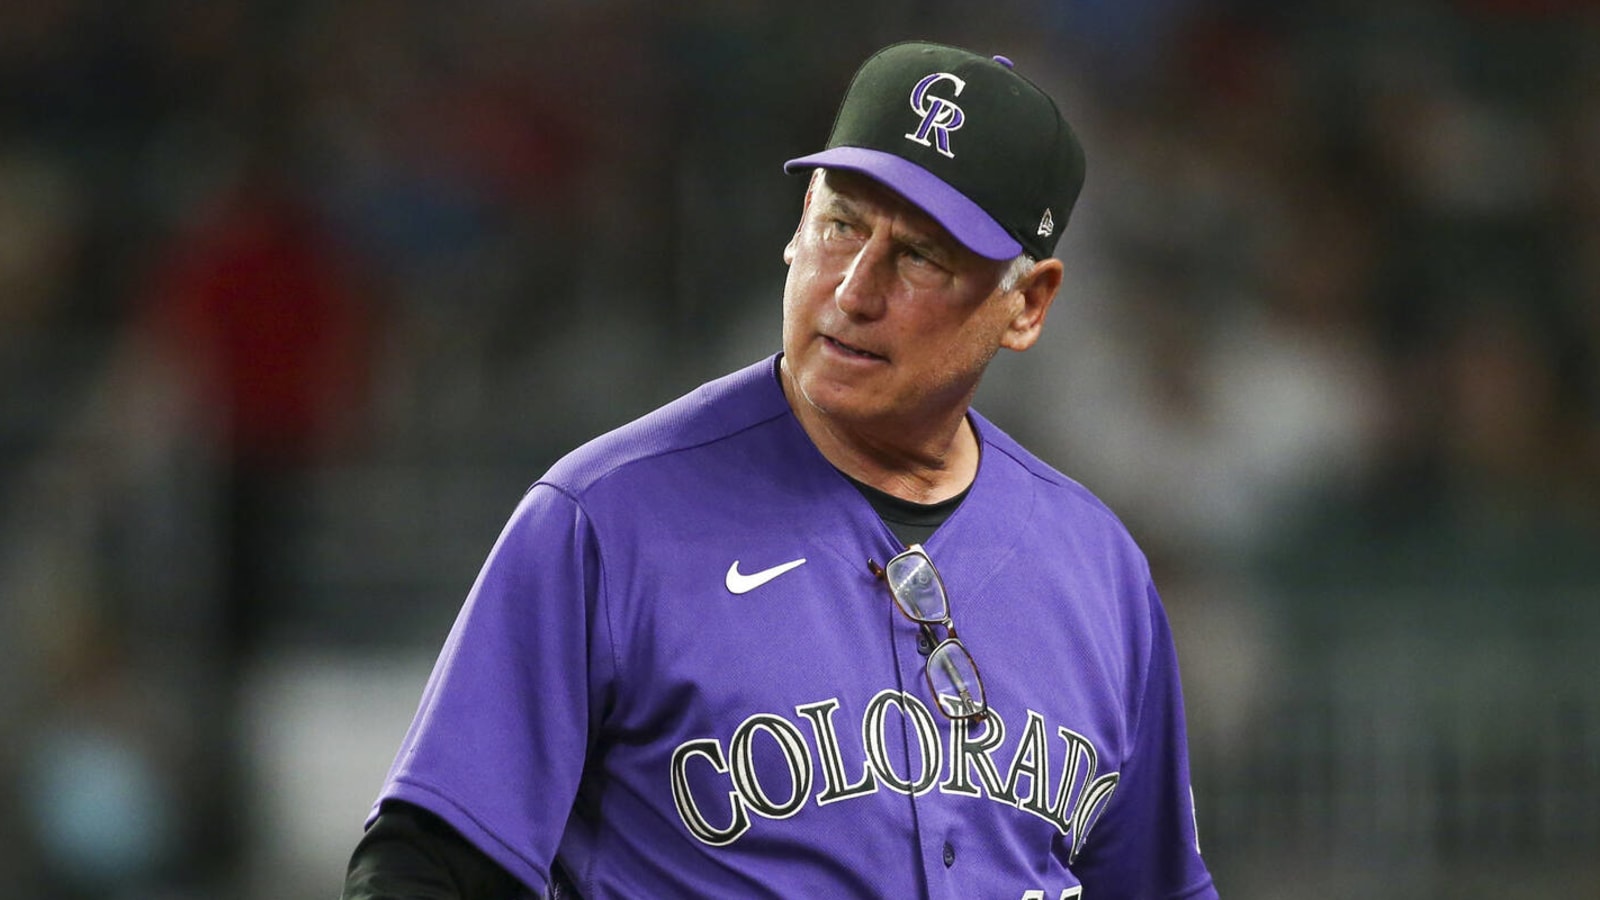 Rockies sign manager to one-year extension